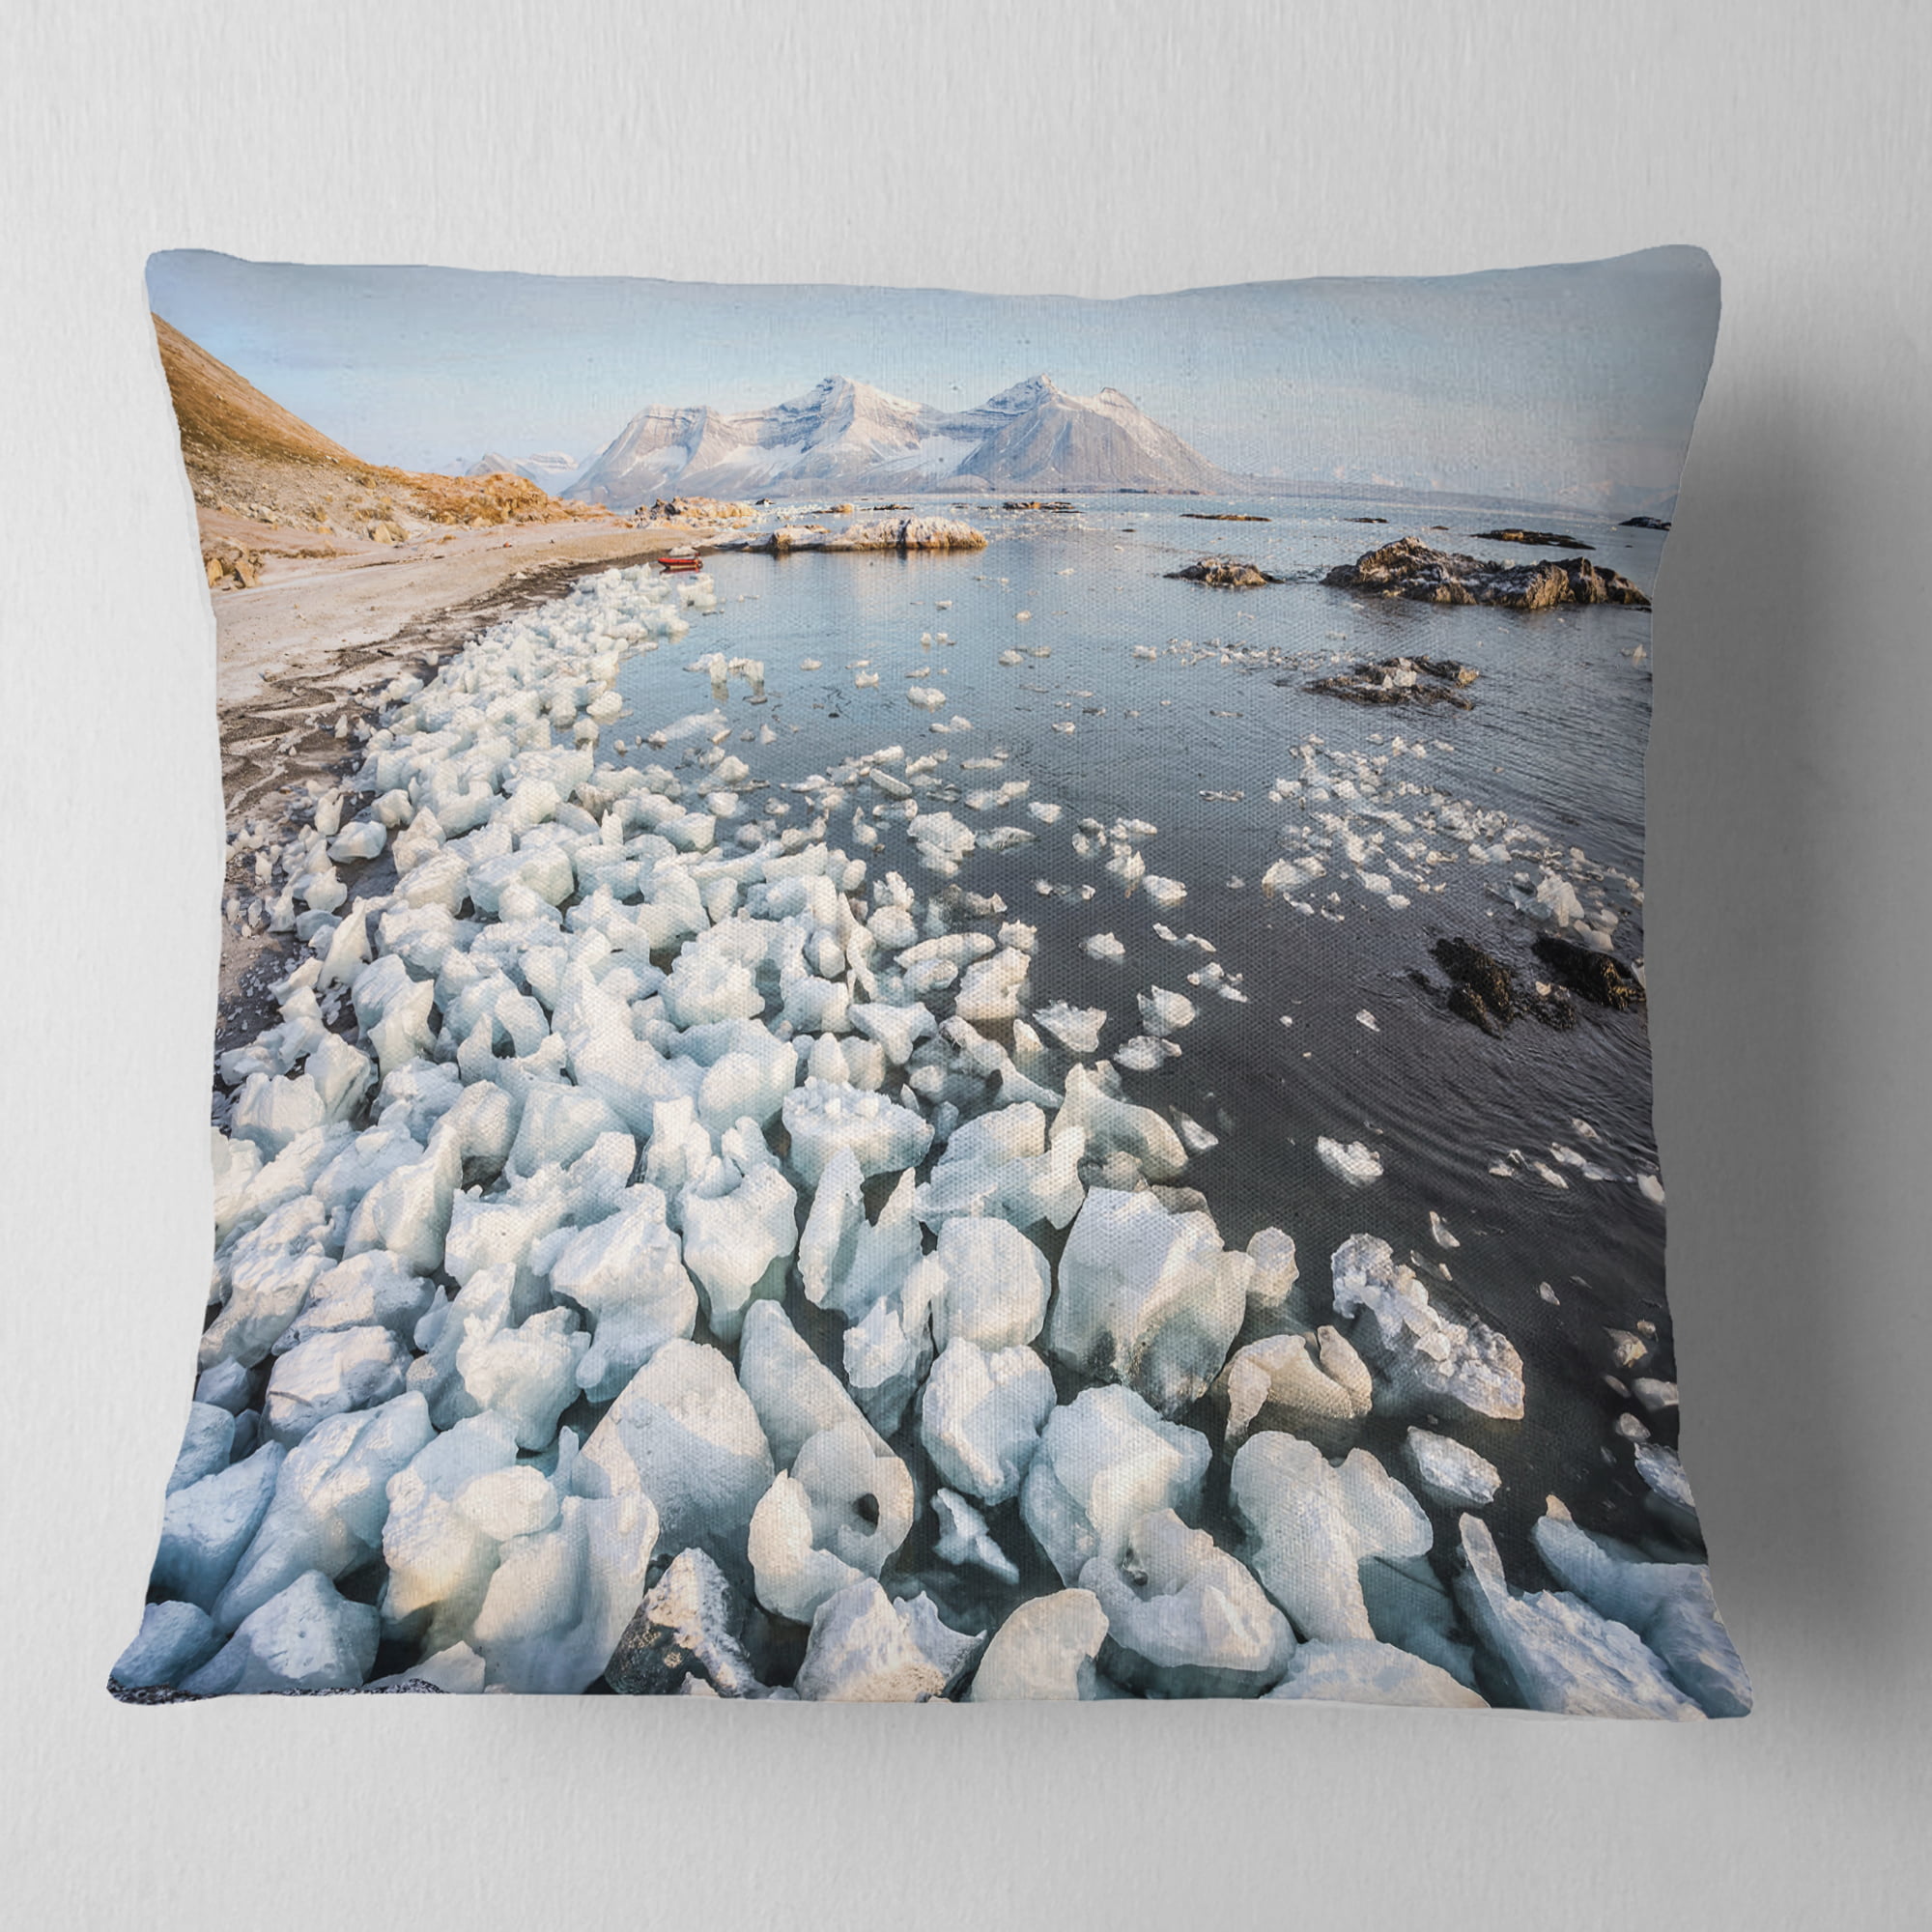 in Sofa Throw Pillow 16 in Designart CU14668-16-16 Sunny Morning in Arctic Spitsbergen Landscape Printed Cushion Cover for Living Room x 16 in